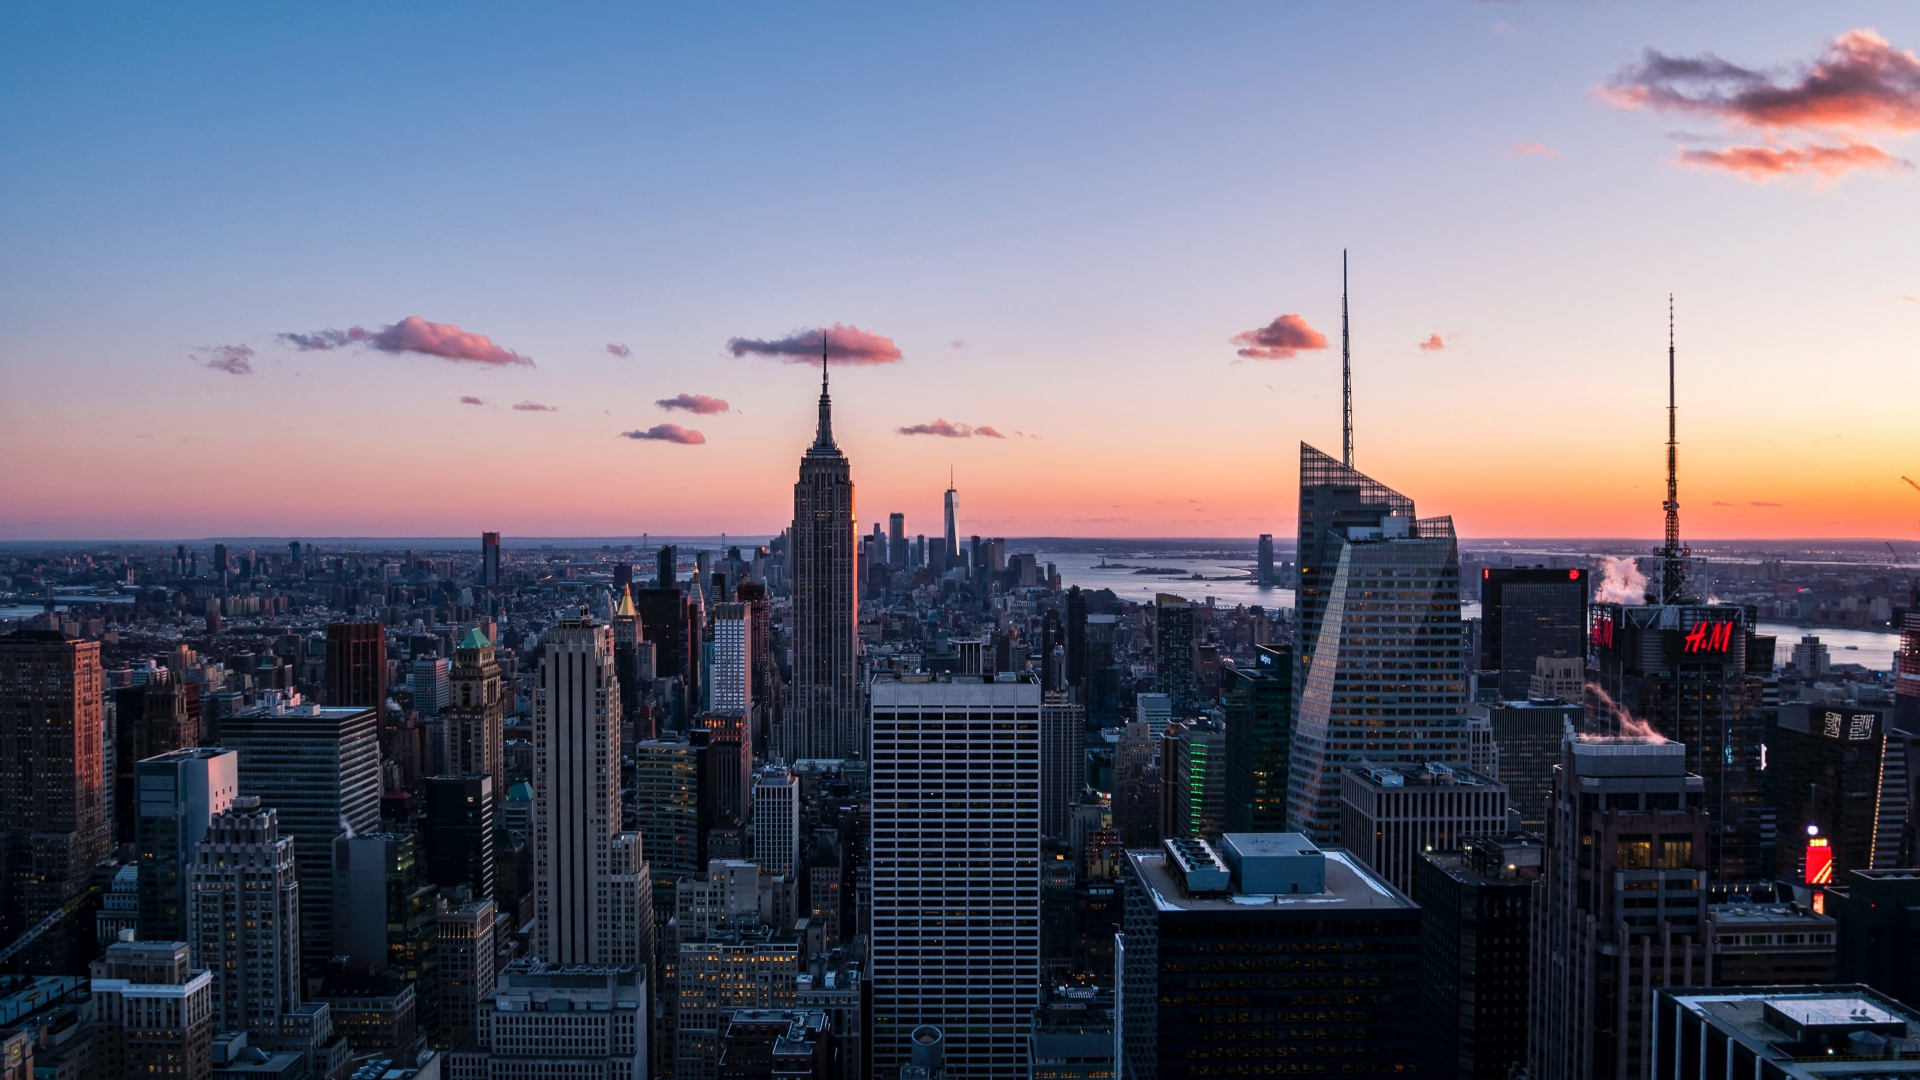 Download 1920x1080 wallpaper cityscape, evening, buildings, new york